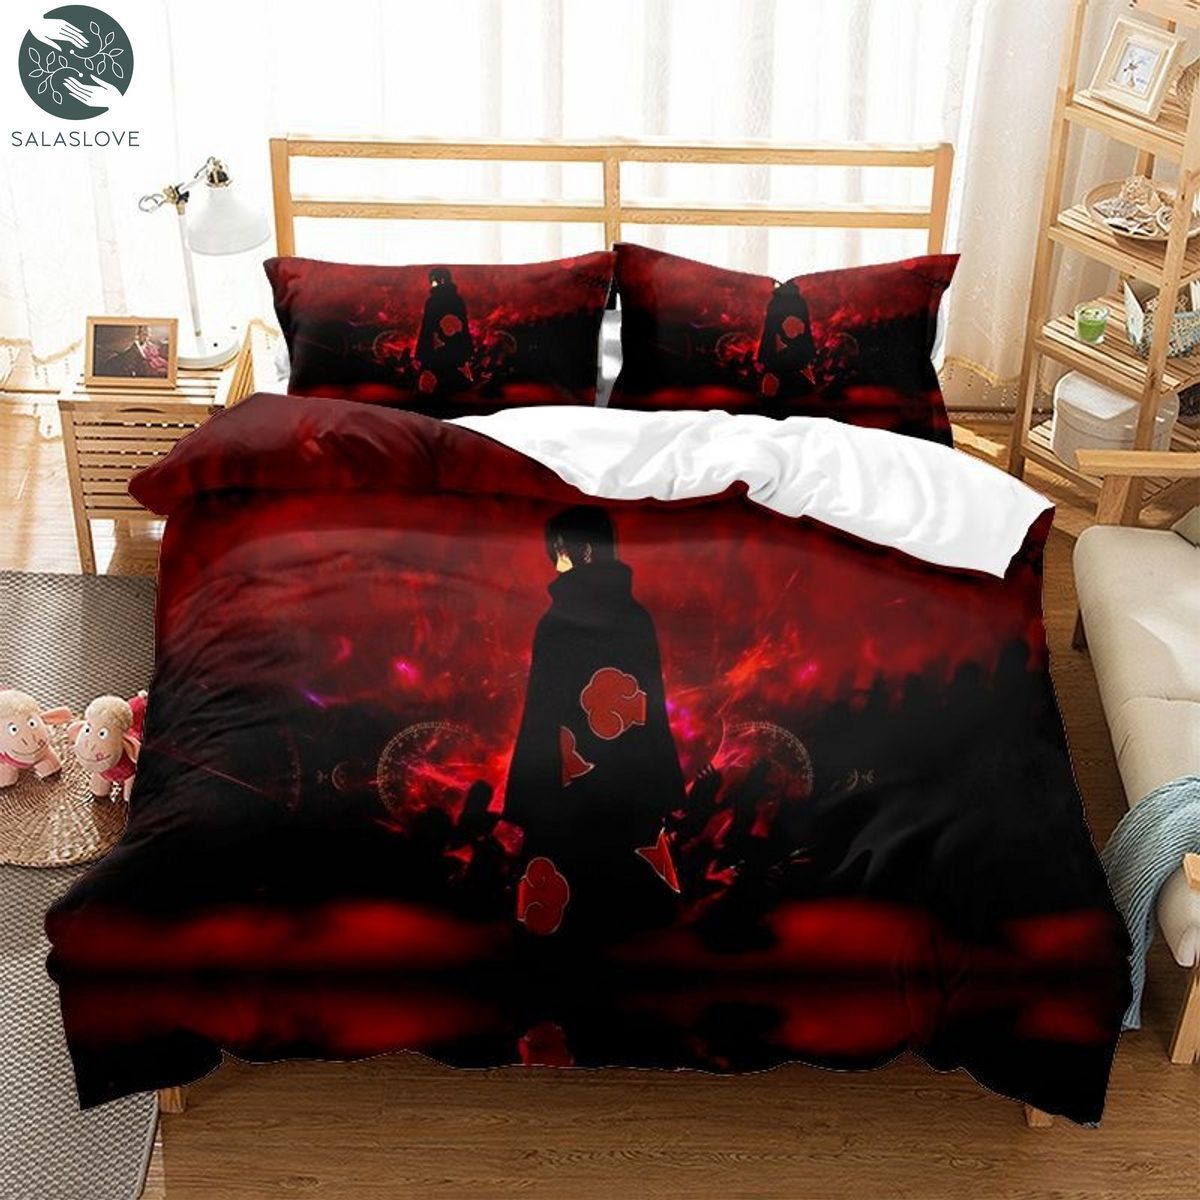 Naruto Bedding Set Duvet Cover Pillowcase Double Queen King Size Kids Bedroom TY8401